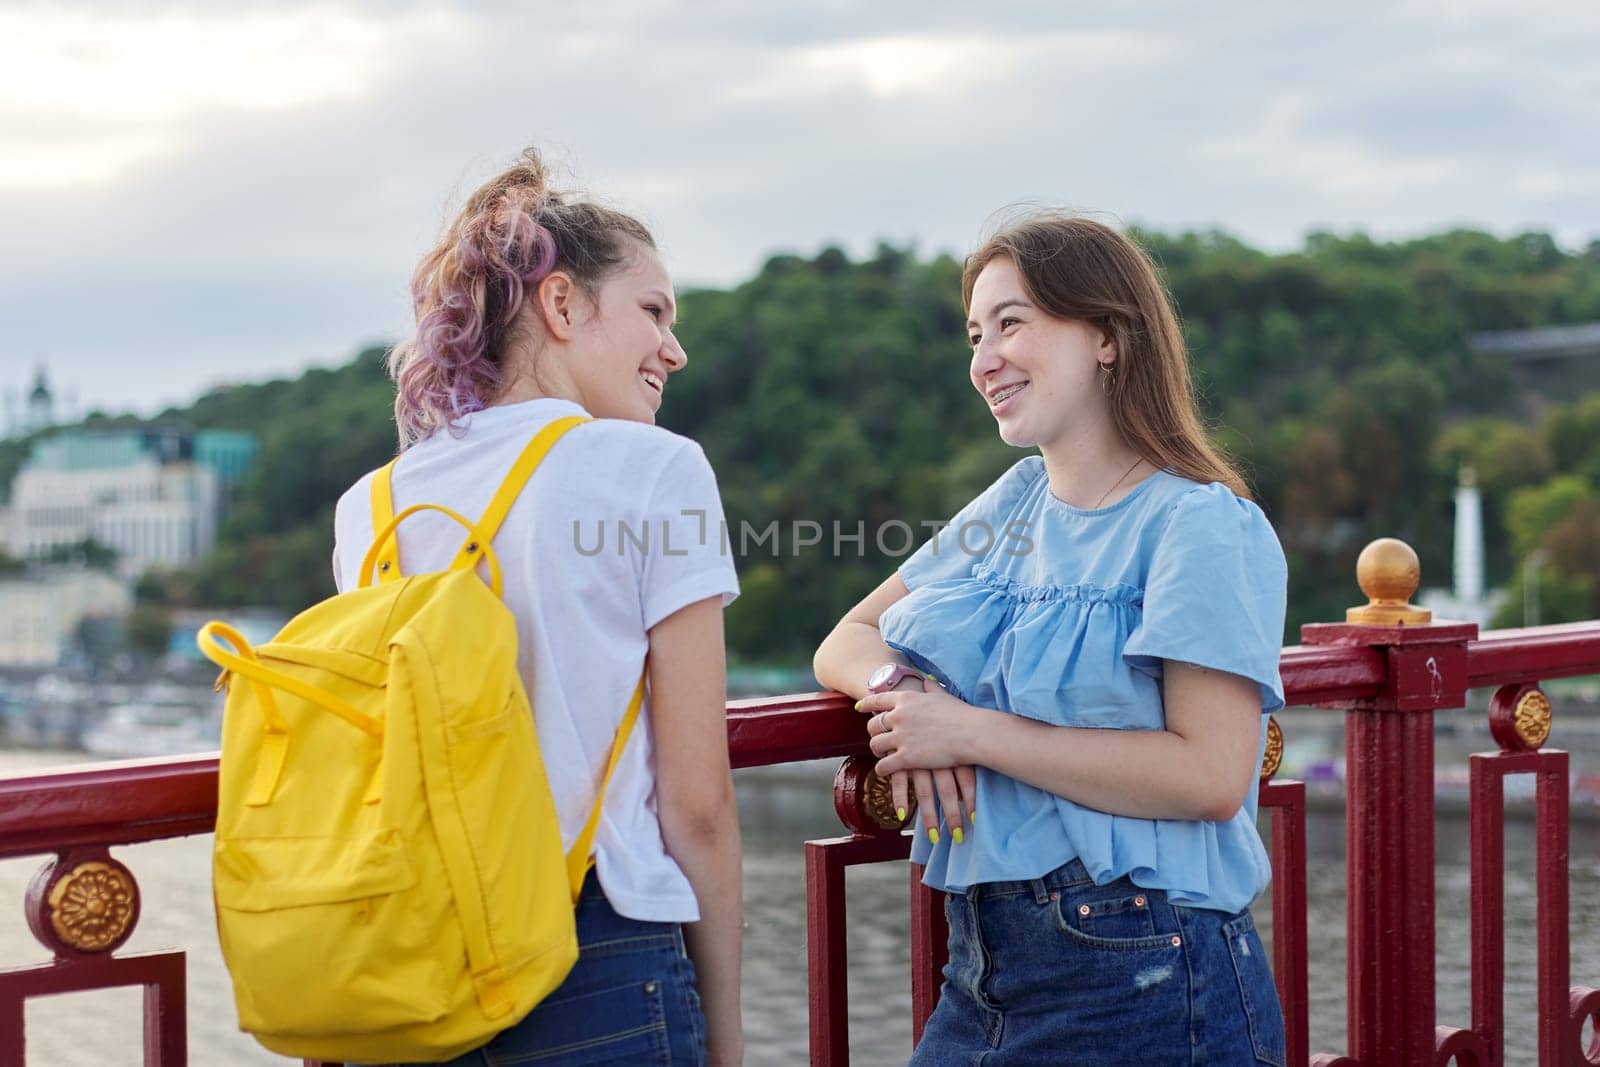 Portrait of two teenage girls standing on bridge over river, friends walk on summer sunny day. Friendship, lifestyle, youth, teens